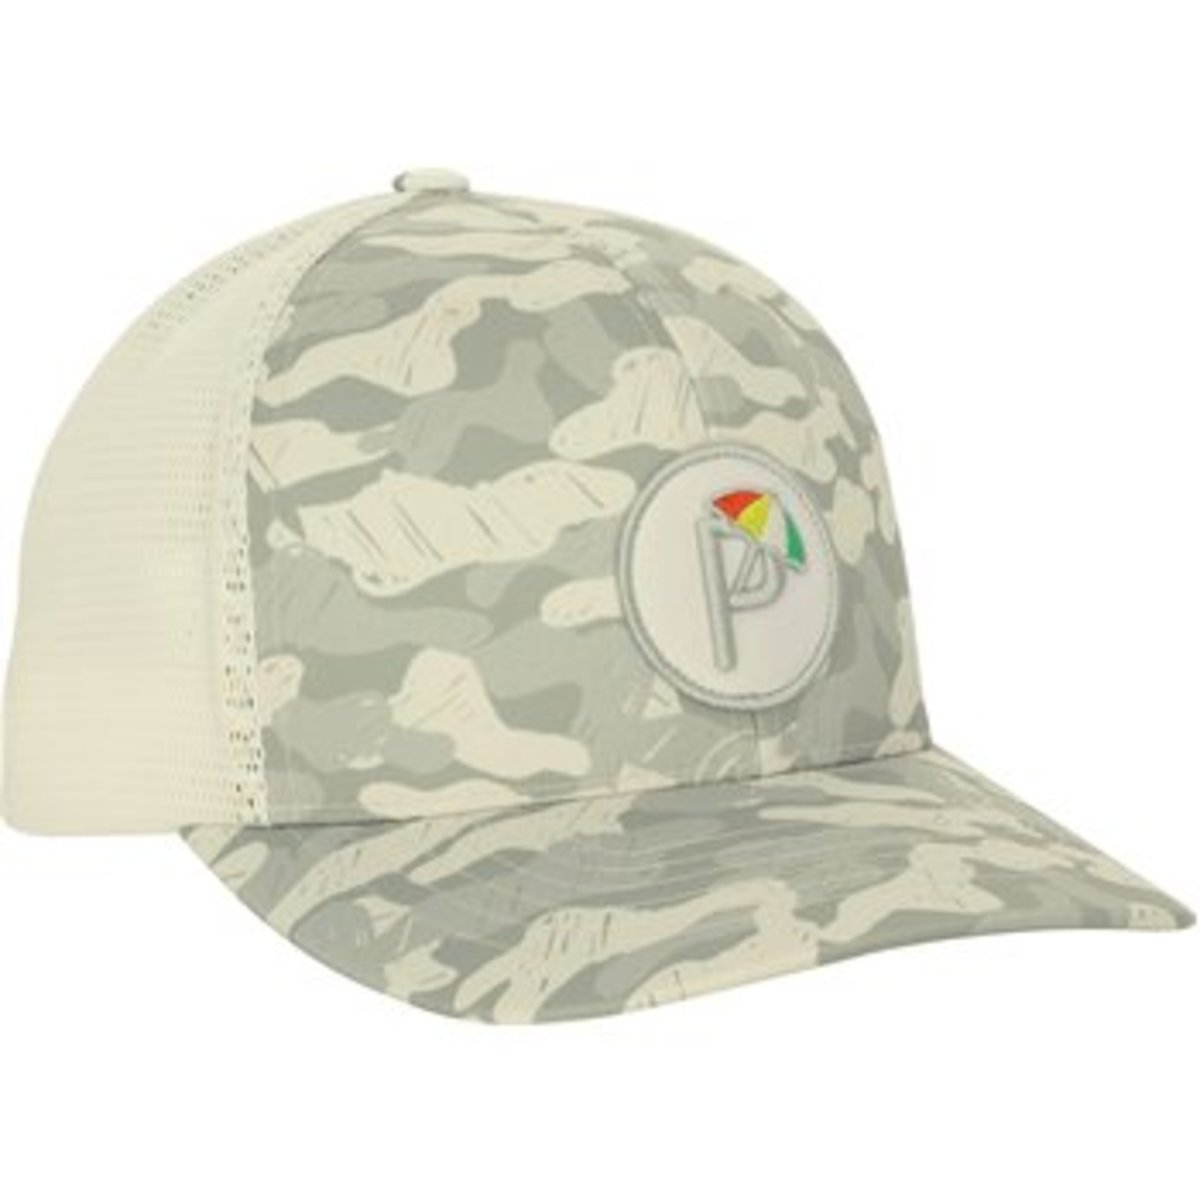 Shop Puma golf hats - like the API camo on the P110 - on Morning Read's online pro shop.